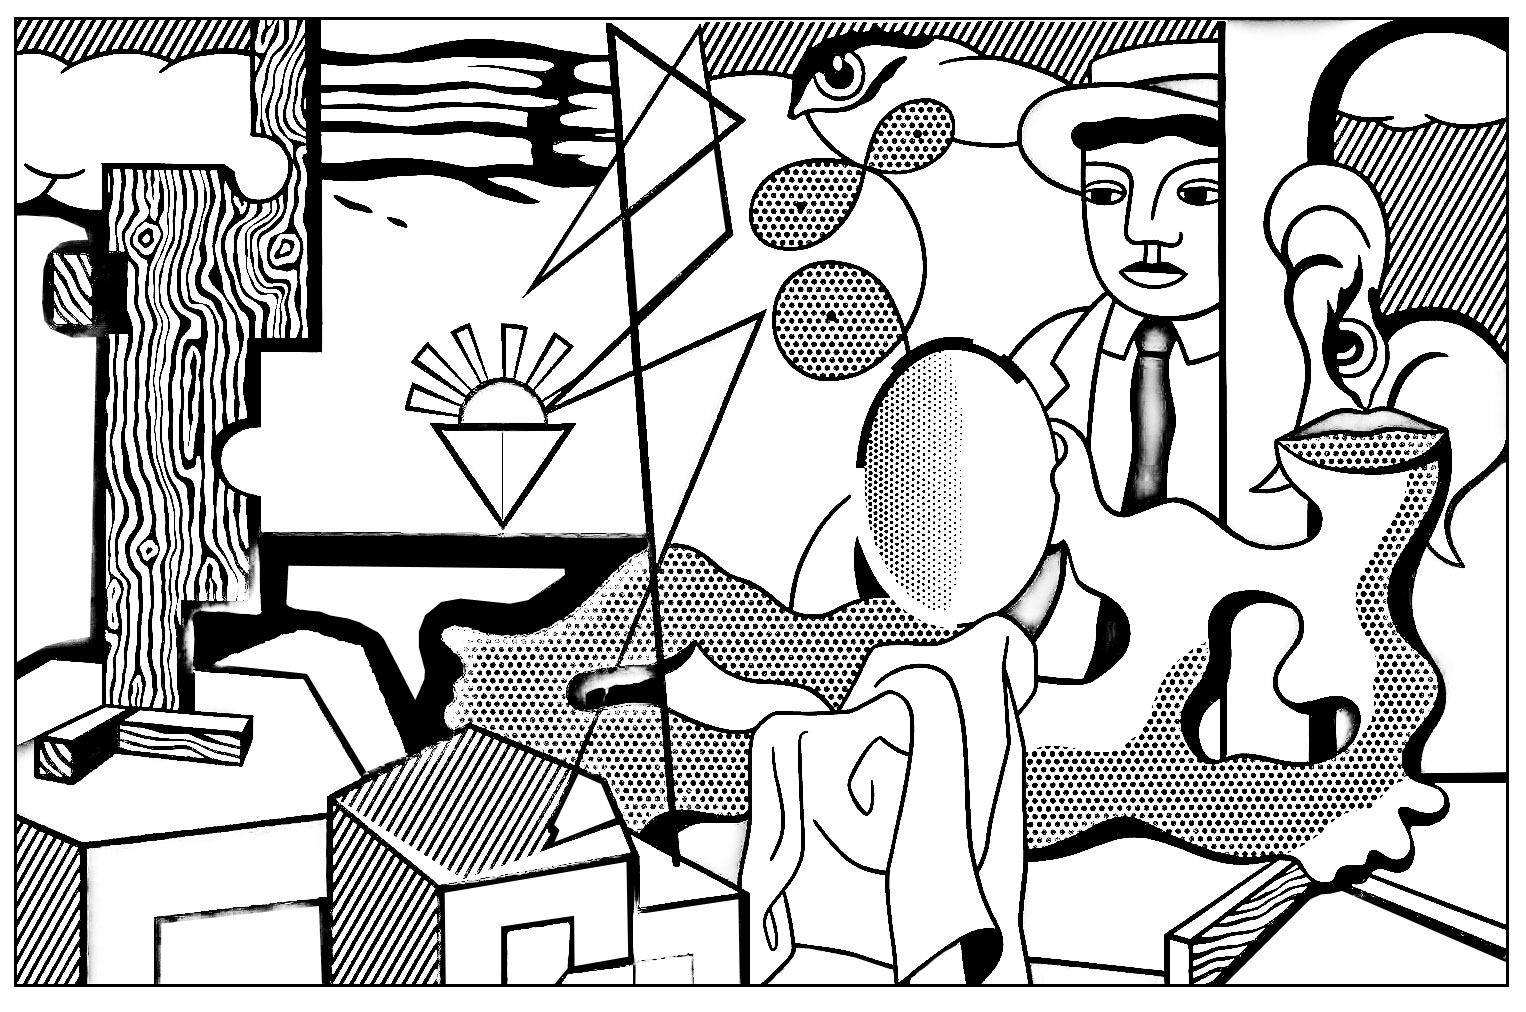 Coloring page inspired by 'American Icons' by Roy Lichtenstein (1978)